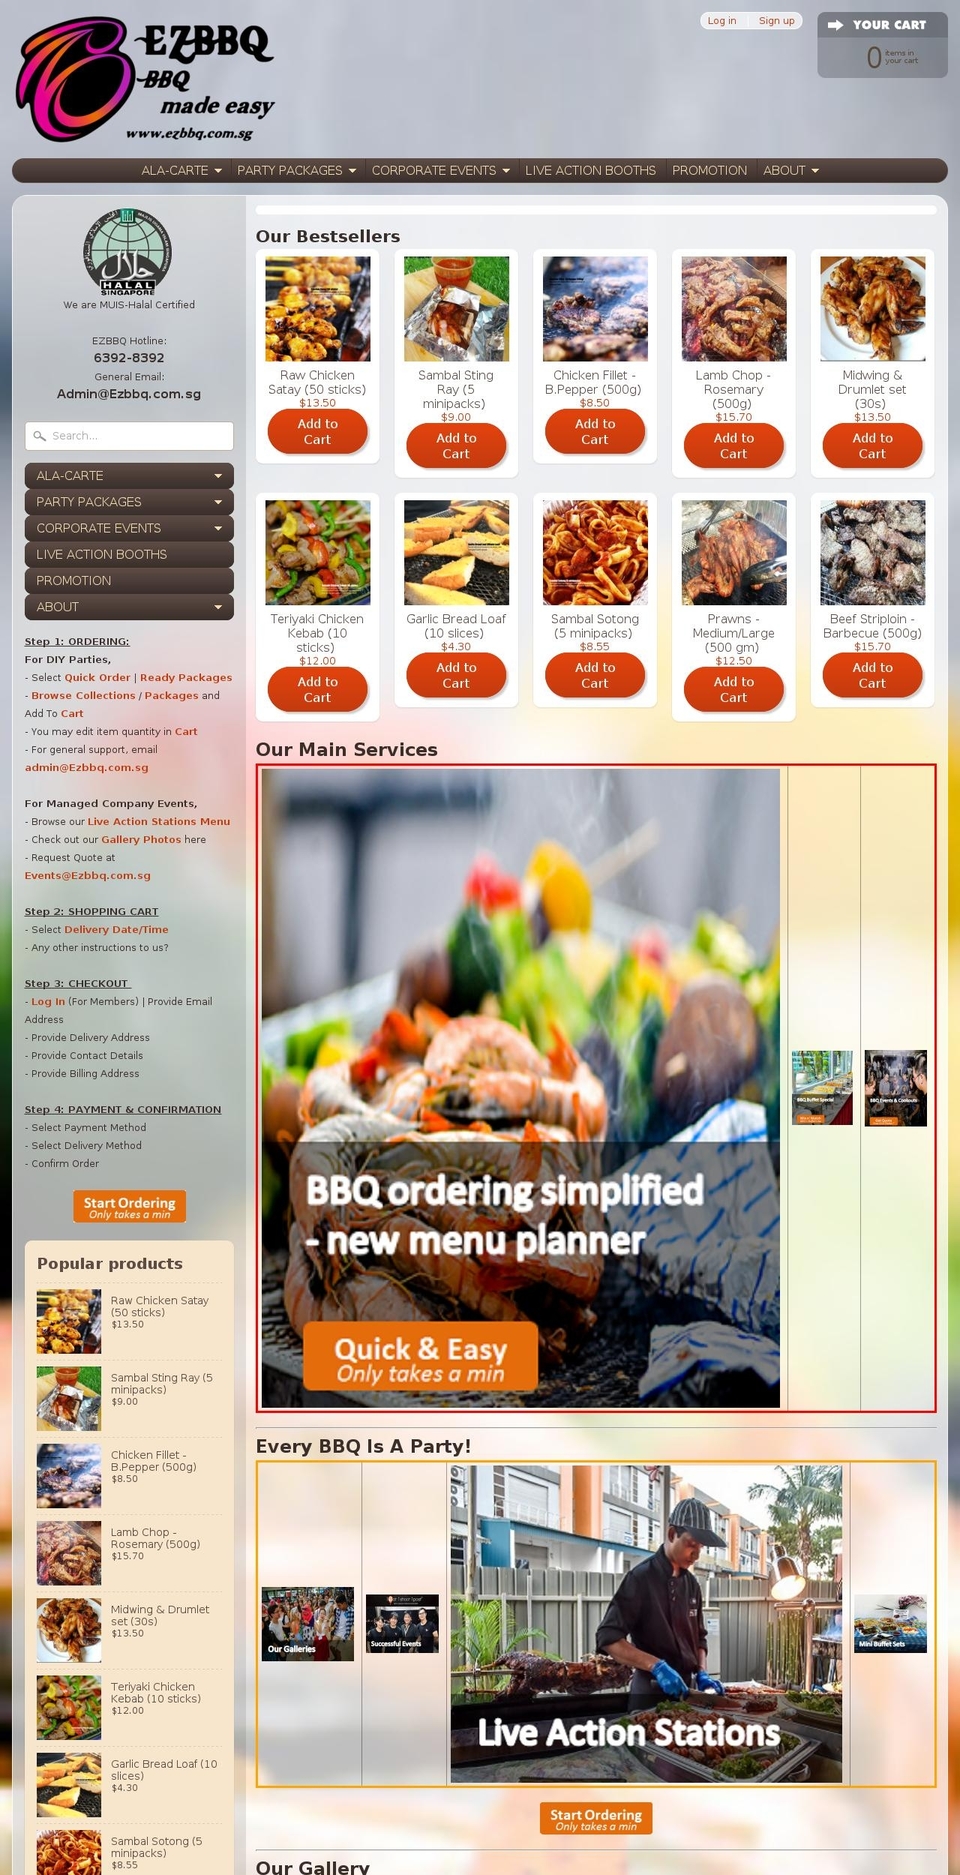 Copy of Copy of Working Backup @ 31\/10\/16 Shopify theme site example ezbbq.com.sg